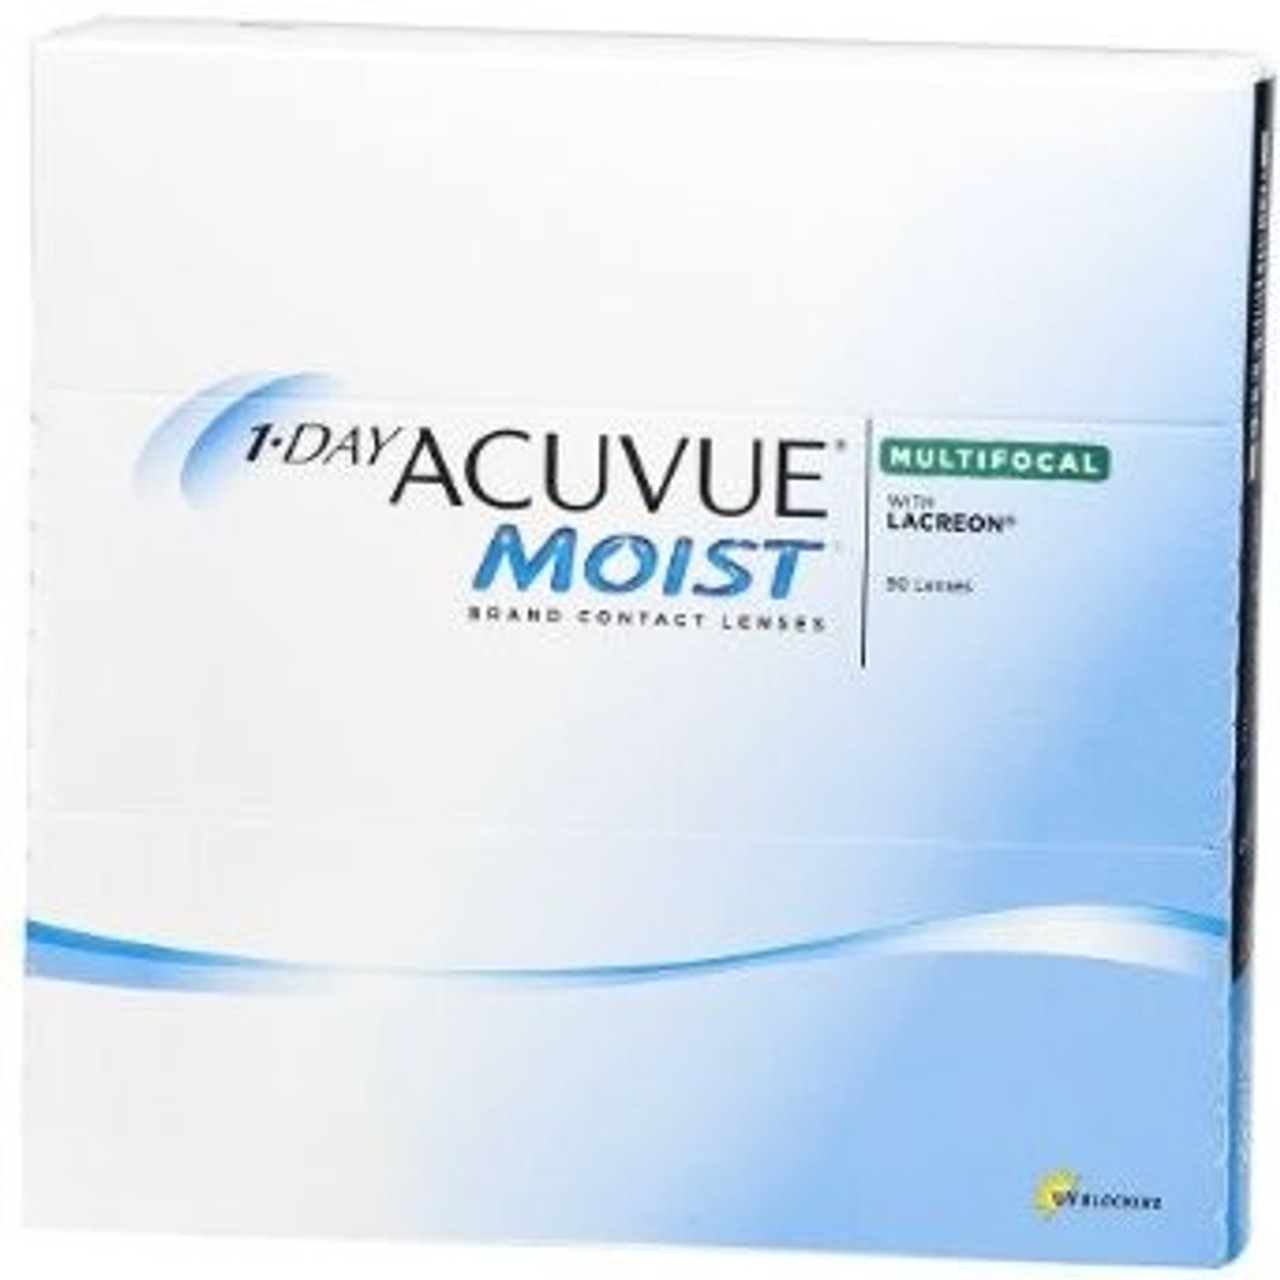 1-day-acuvue-moist-multifocal-90-pack-1-day-acuvue-moist-for